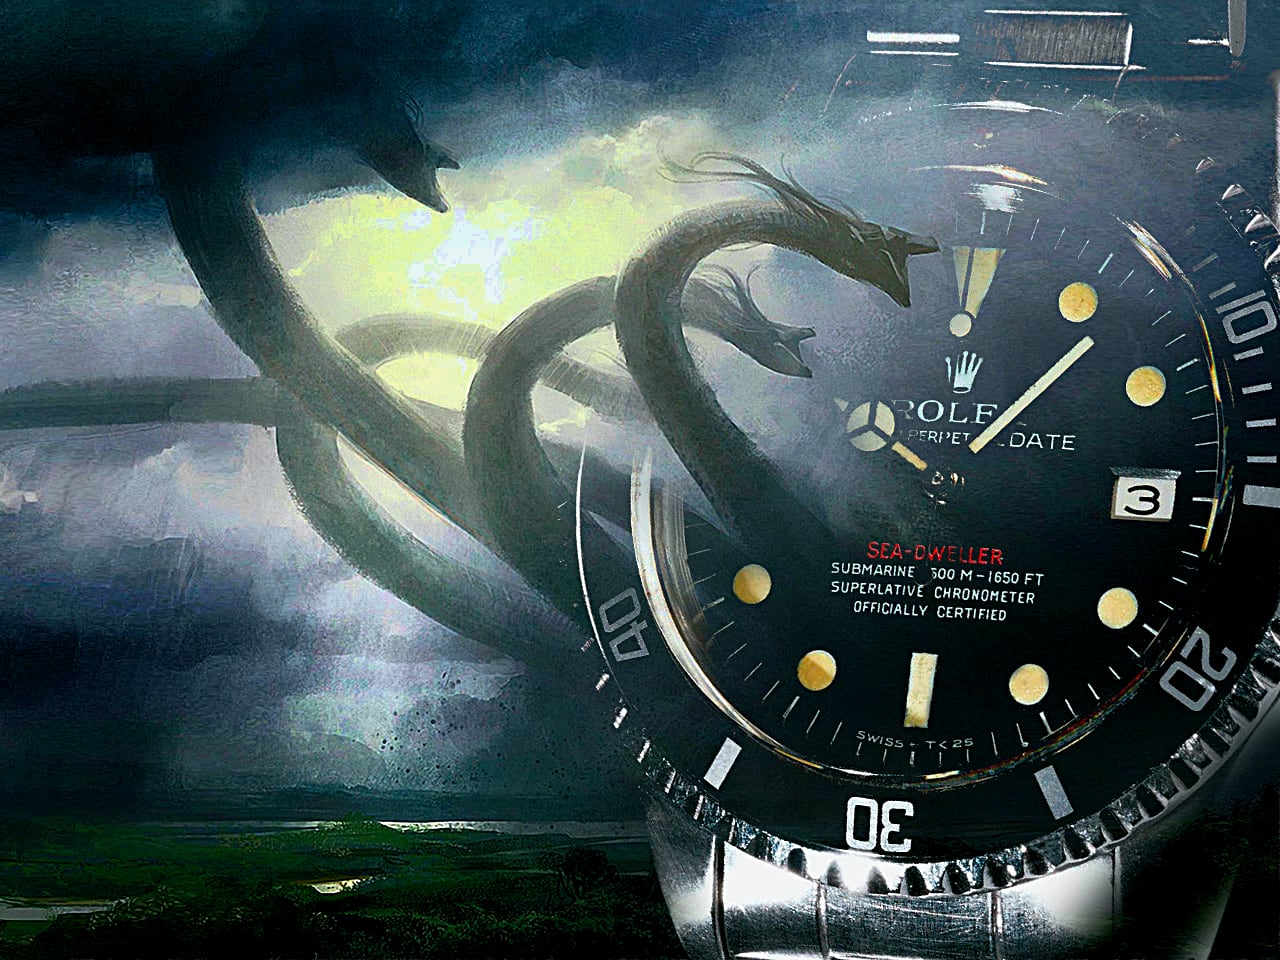 Rob's Rolex Chronicle : Rolex Submariner Date 116610 LV